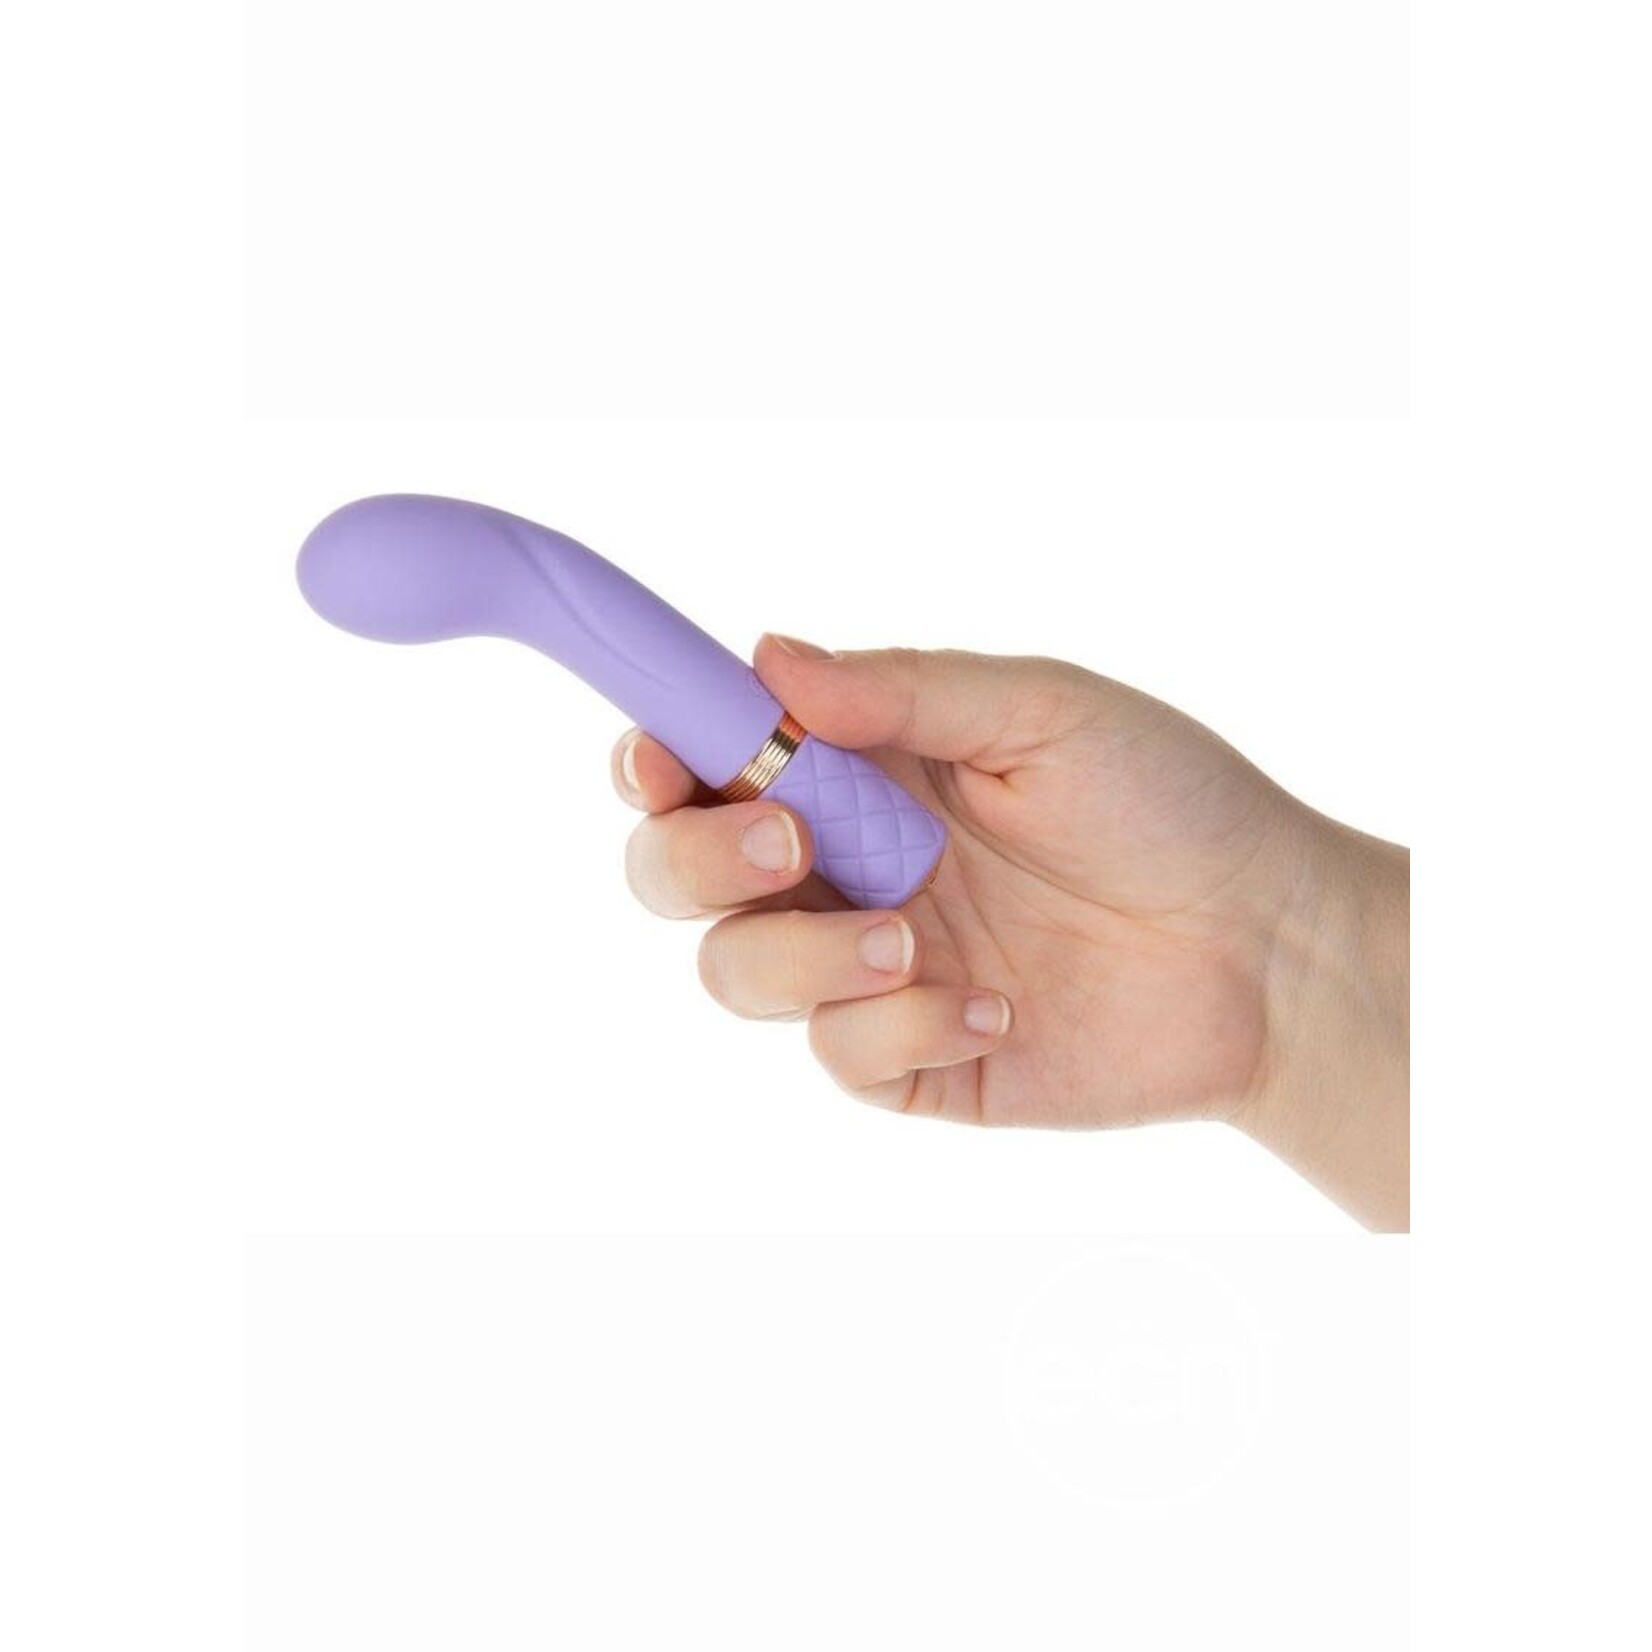 Pillow Talk Special Edition Racy Silicone Rechargeable G-Spot Mini Vibrator - Purple/Rose Gold